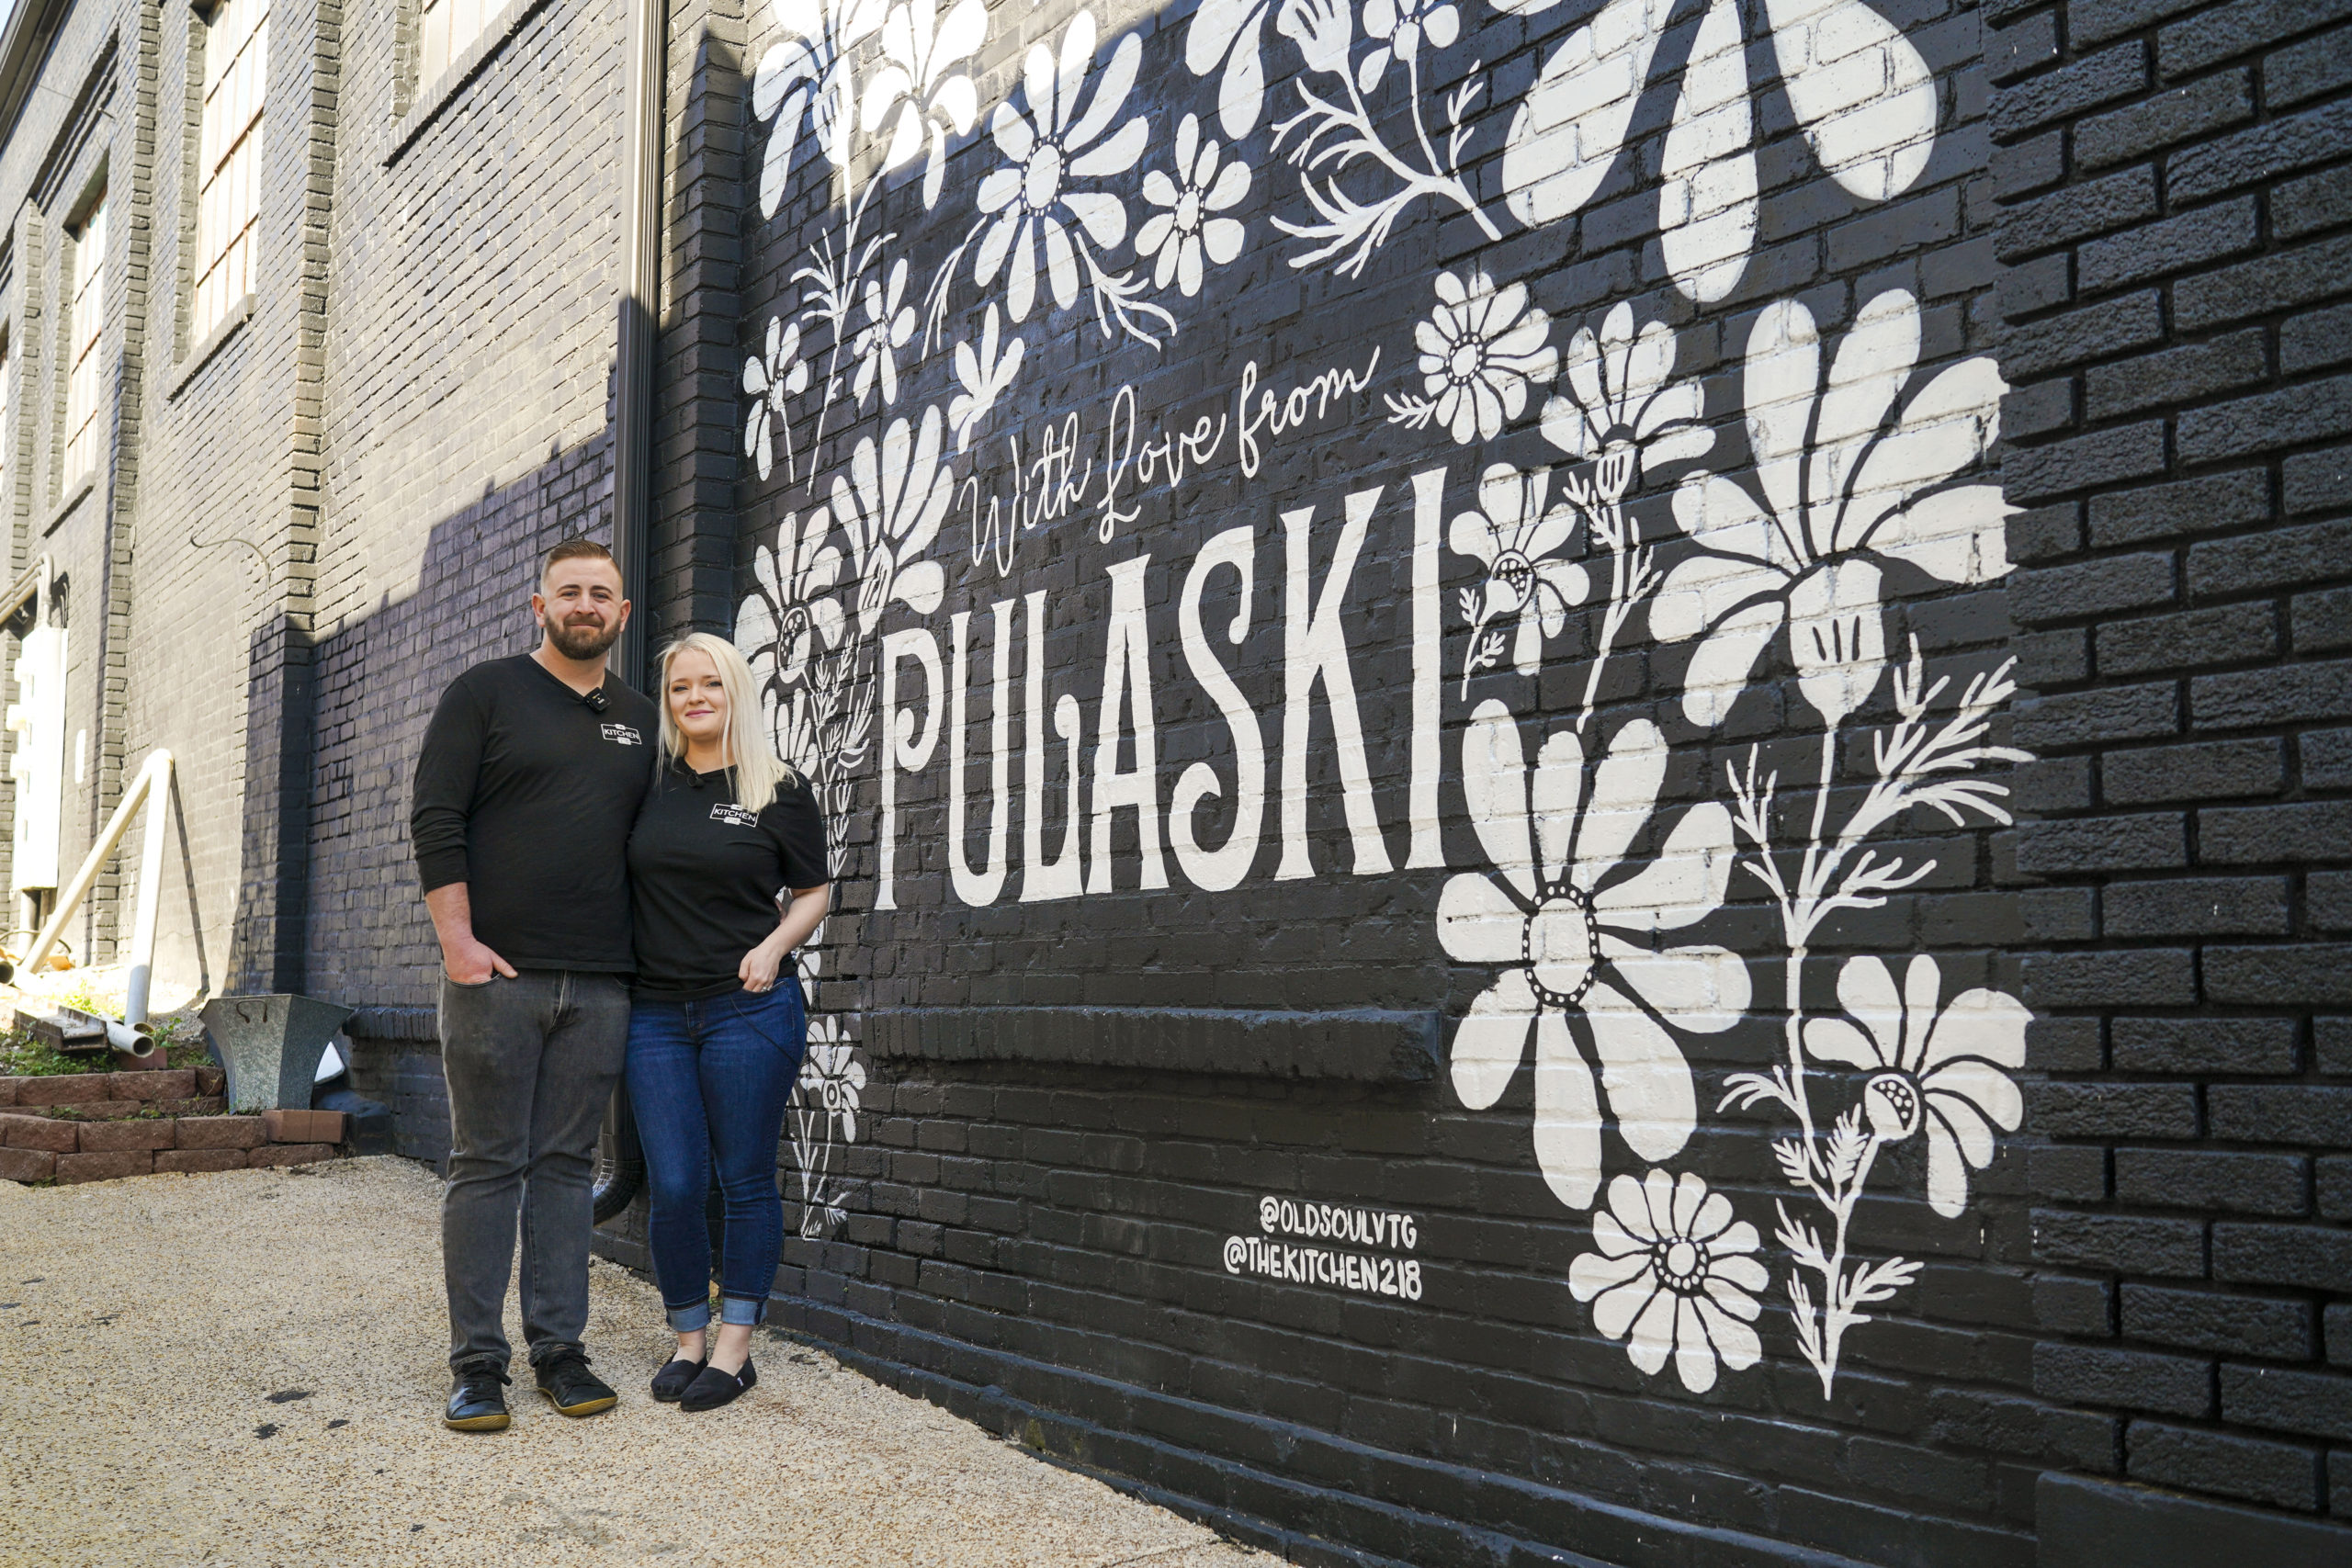 Kitchen 218 owners Jake and Michelle Pfeiffer pose outside their new restaurant in downtown Pulaski.